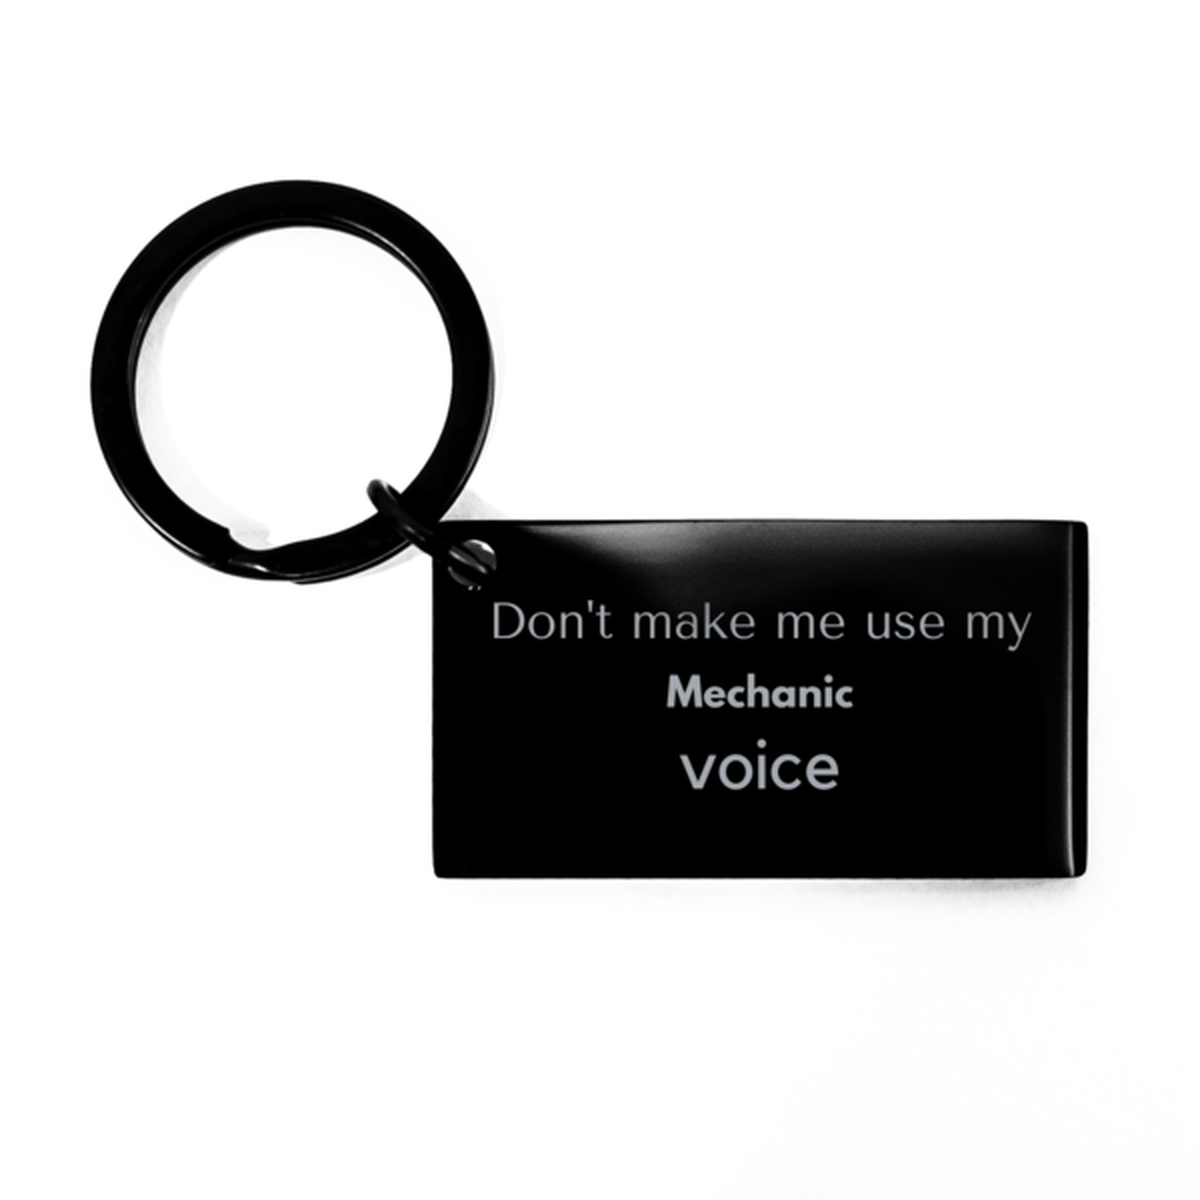 Don't make me use my Mechanic voice, Sarcasm Mechanic Gifts, Christmas Mechanic Keychain Birthday Unique Gifts For Mechanic Coworkers, Men, Women, Colleague, Friends